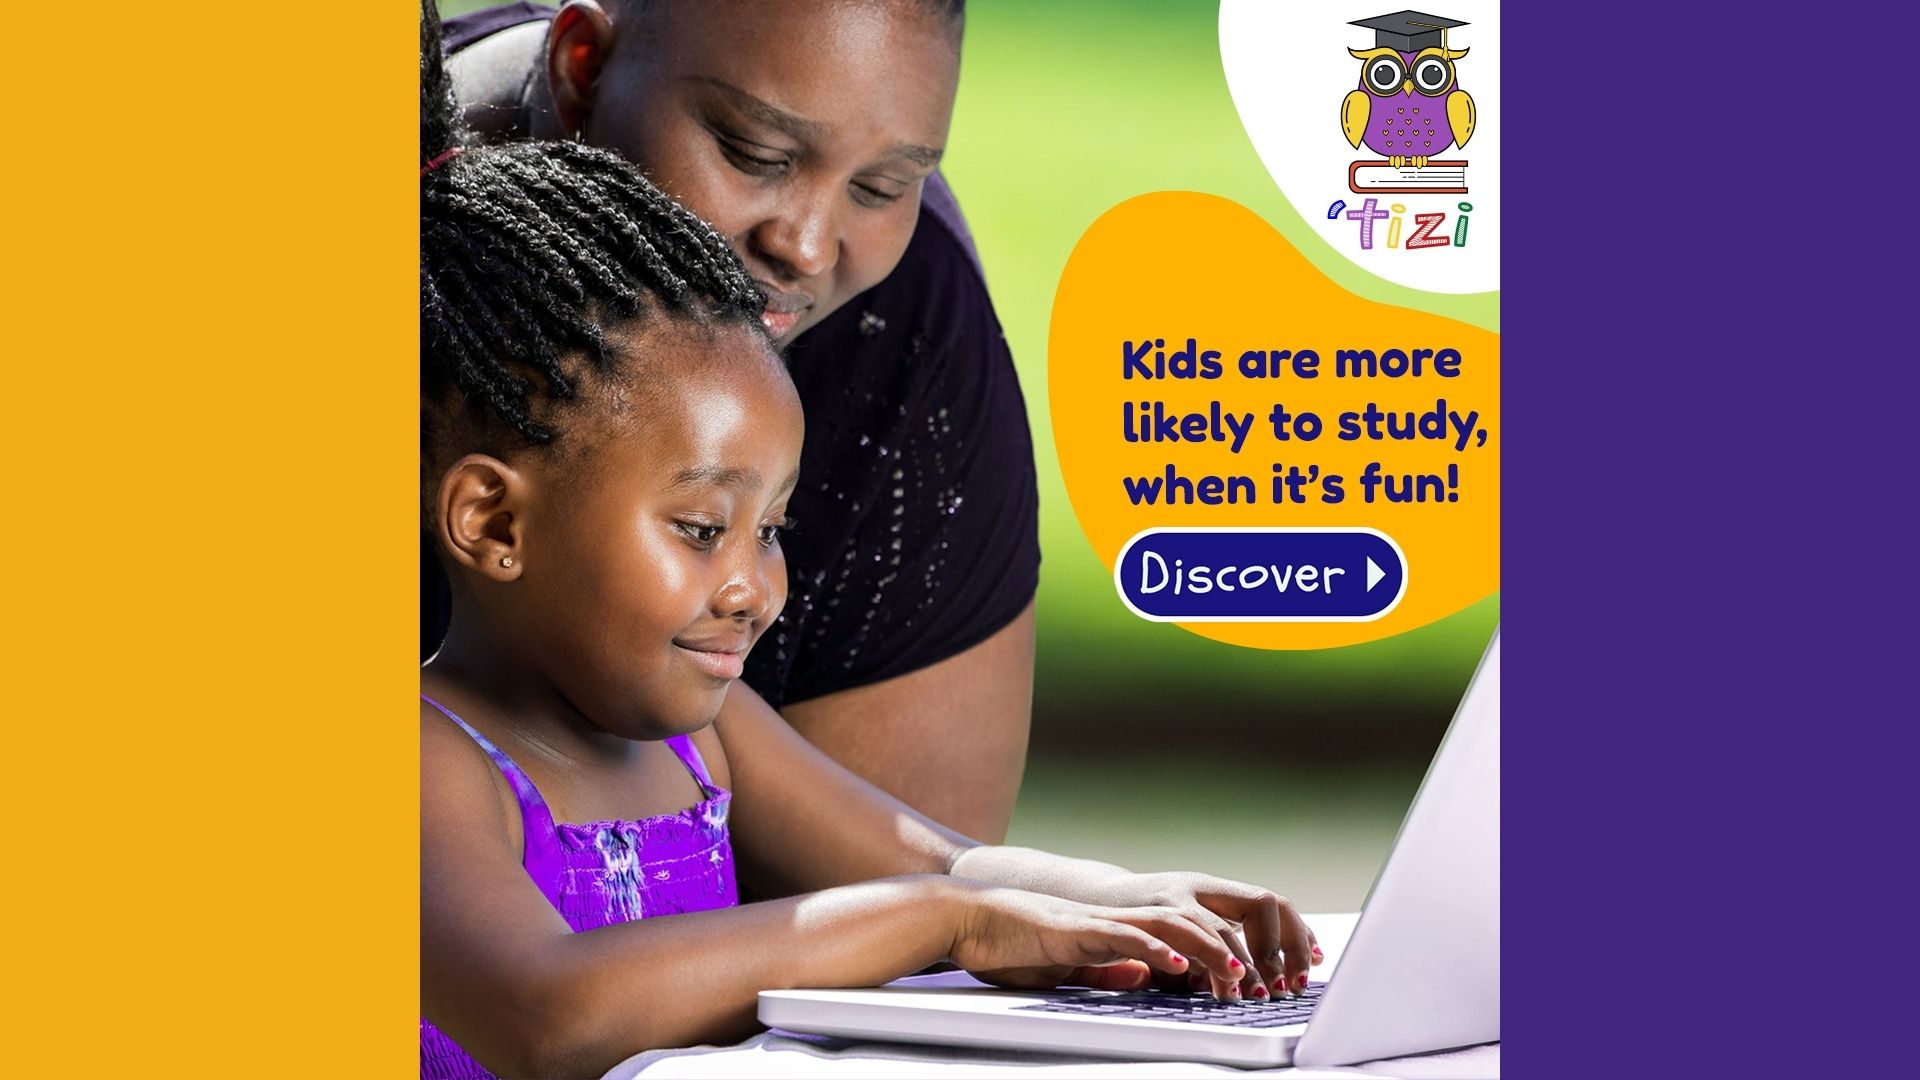 Usiku Games targets 8 million primary pupils with mobile edutainment games to improve math, sciences, and languages